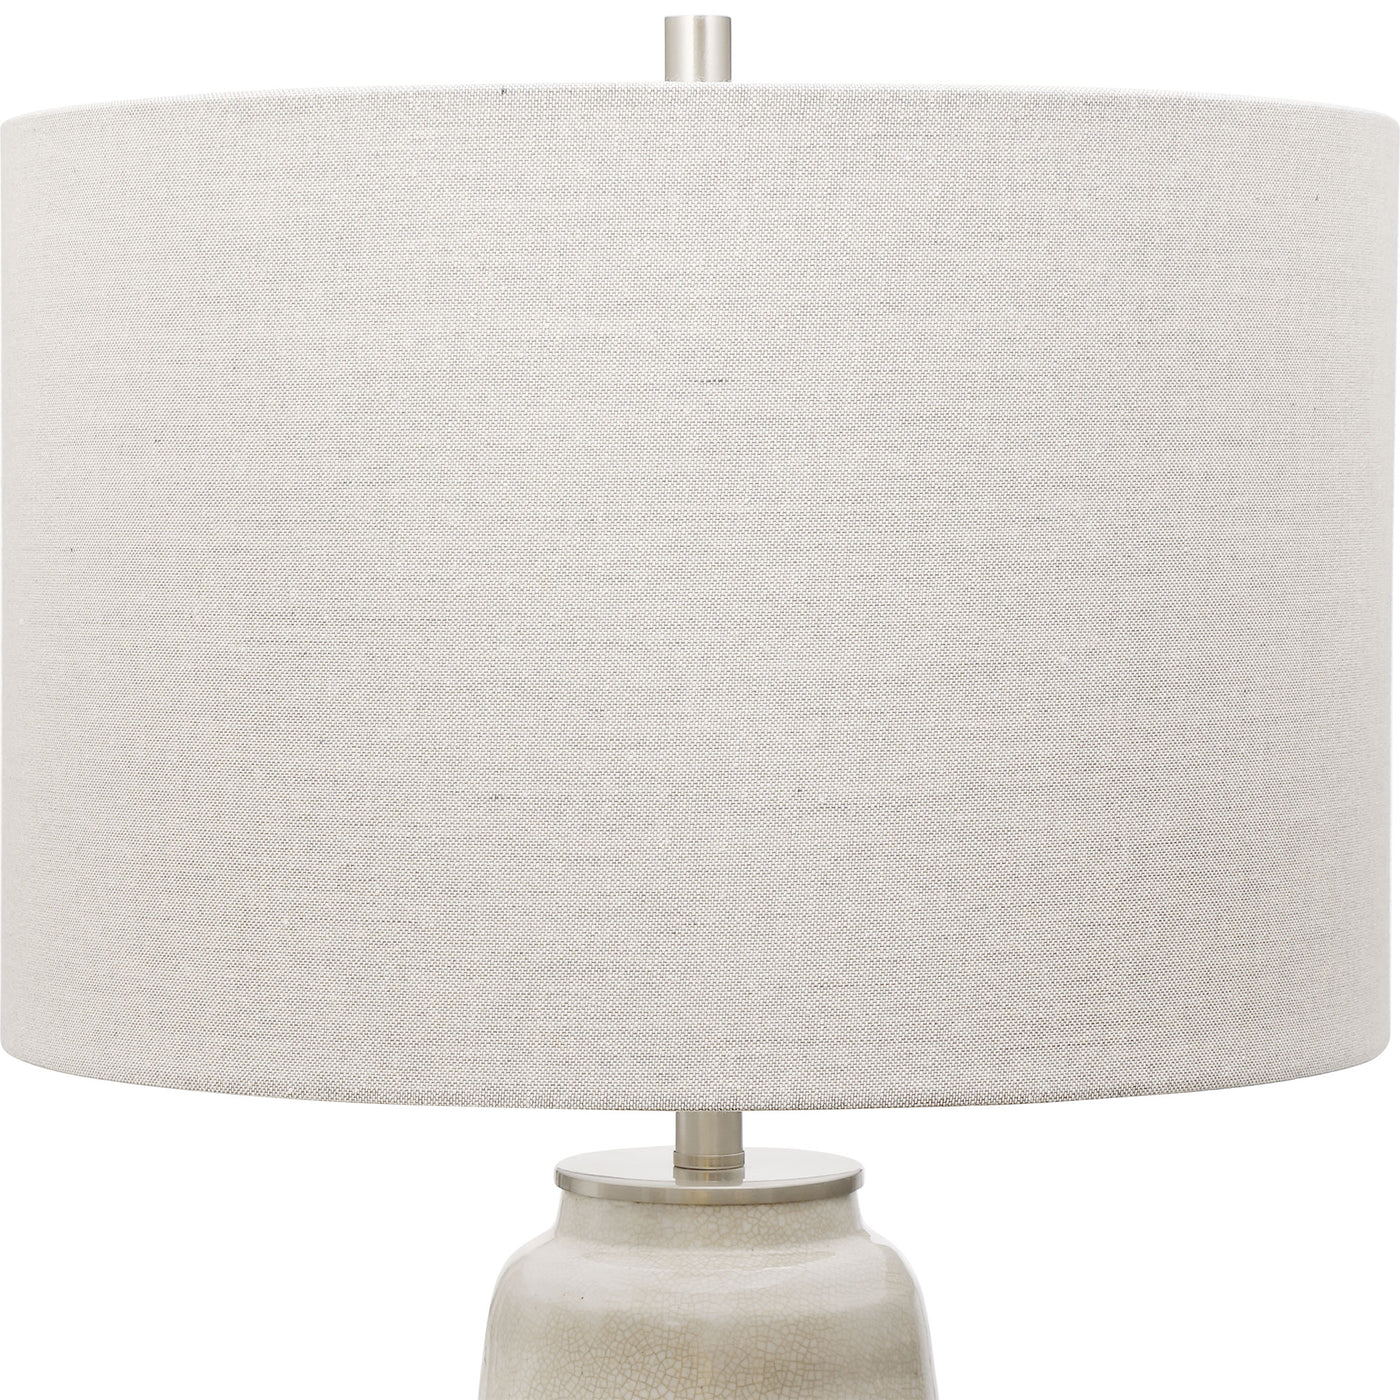 Showcasing A Rustic Casual Look, This Ceramic Table Lamp Features An Off-white Crackle Glaze With Distressed Rust Brown De...